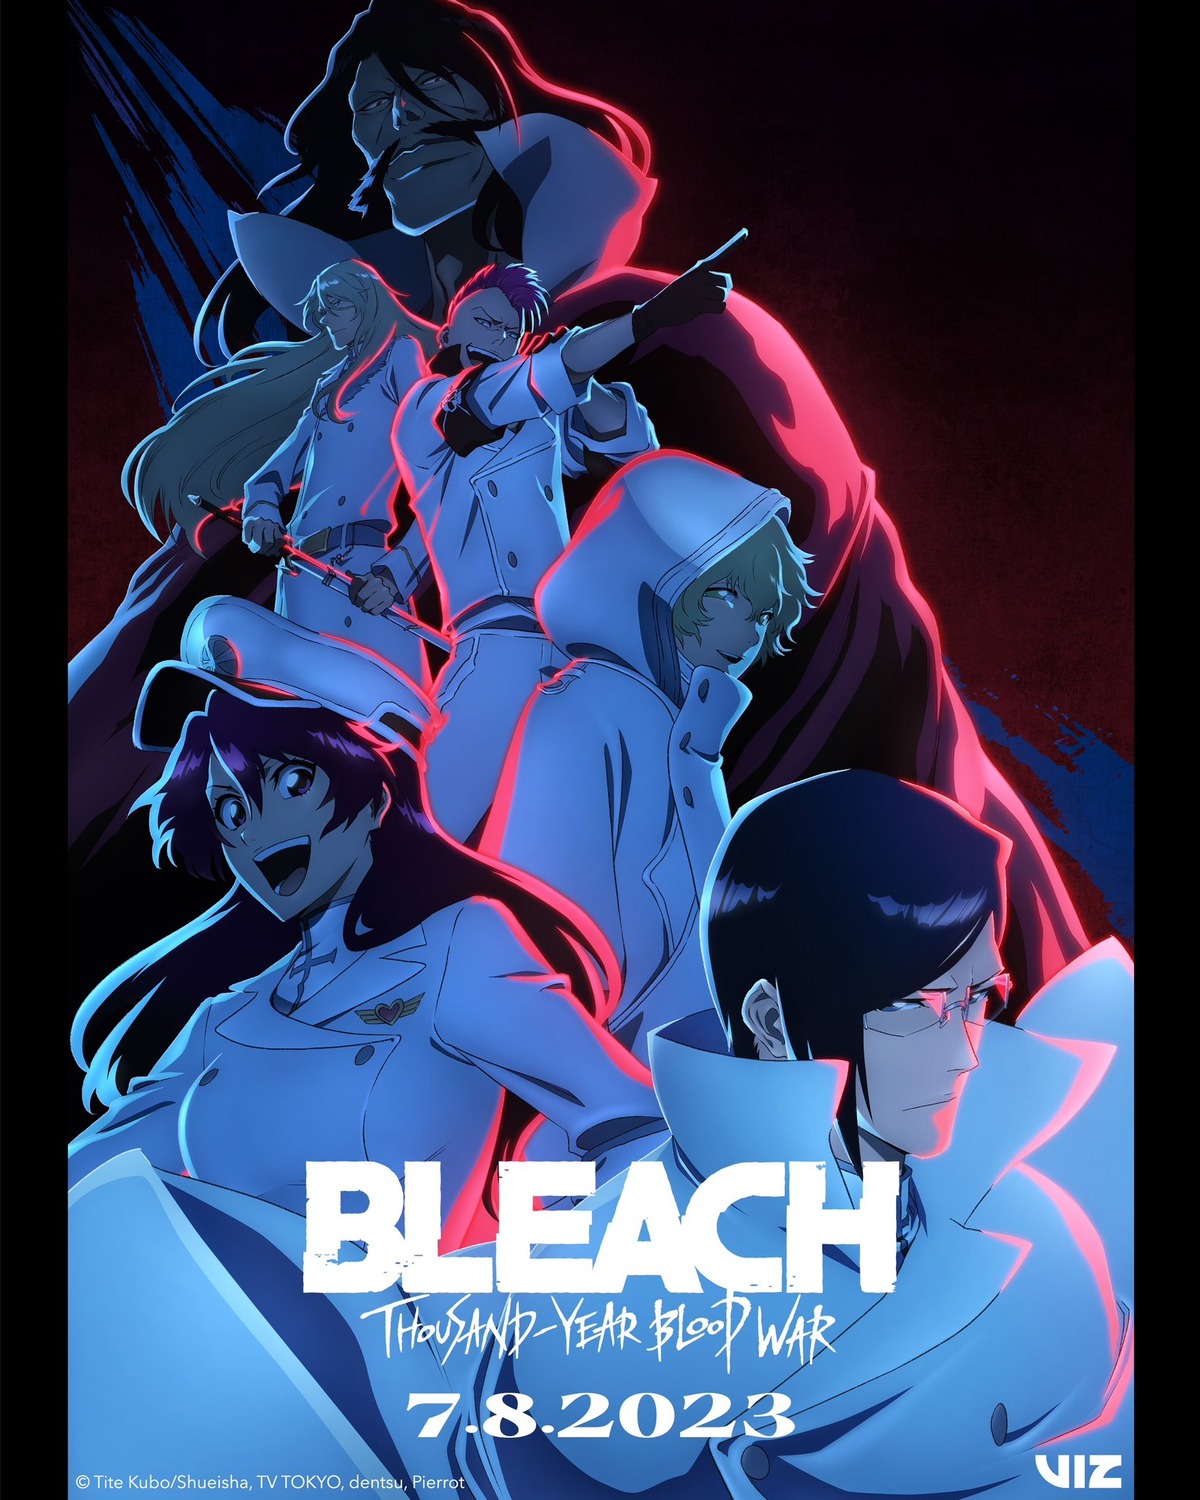 Extra Large TV Poster Image for Bleach: Thousand Year Blood War (#6 of 7)